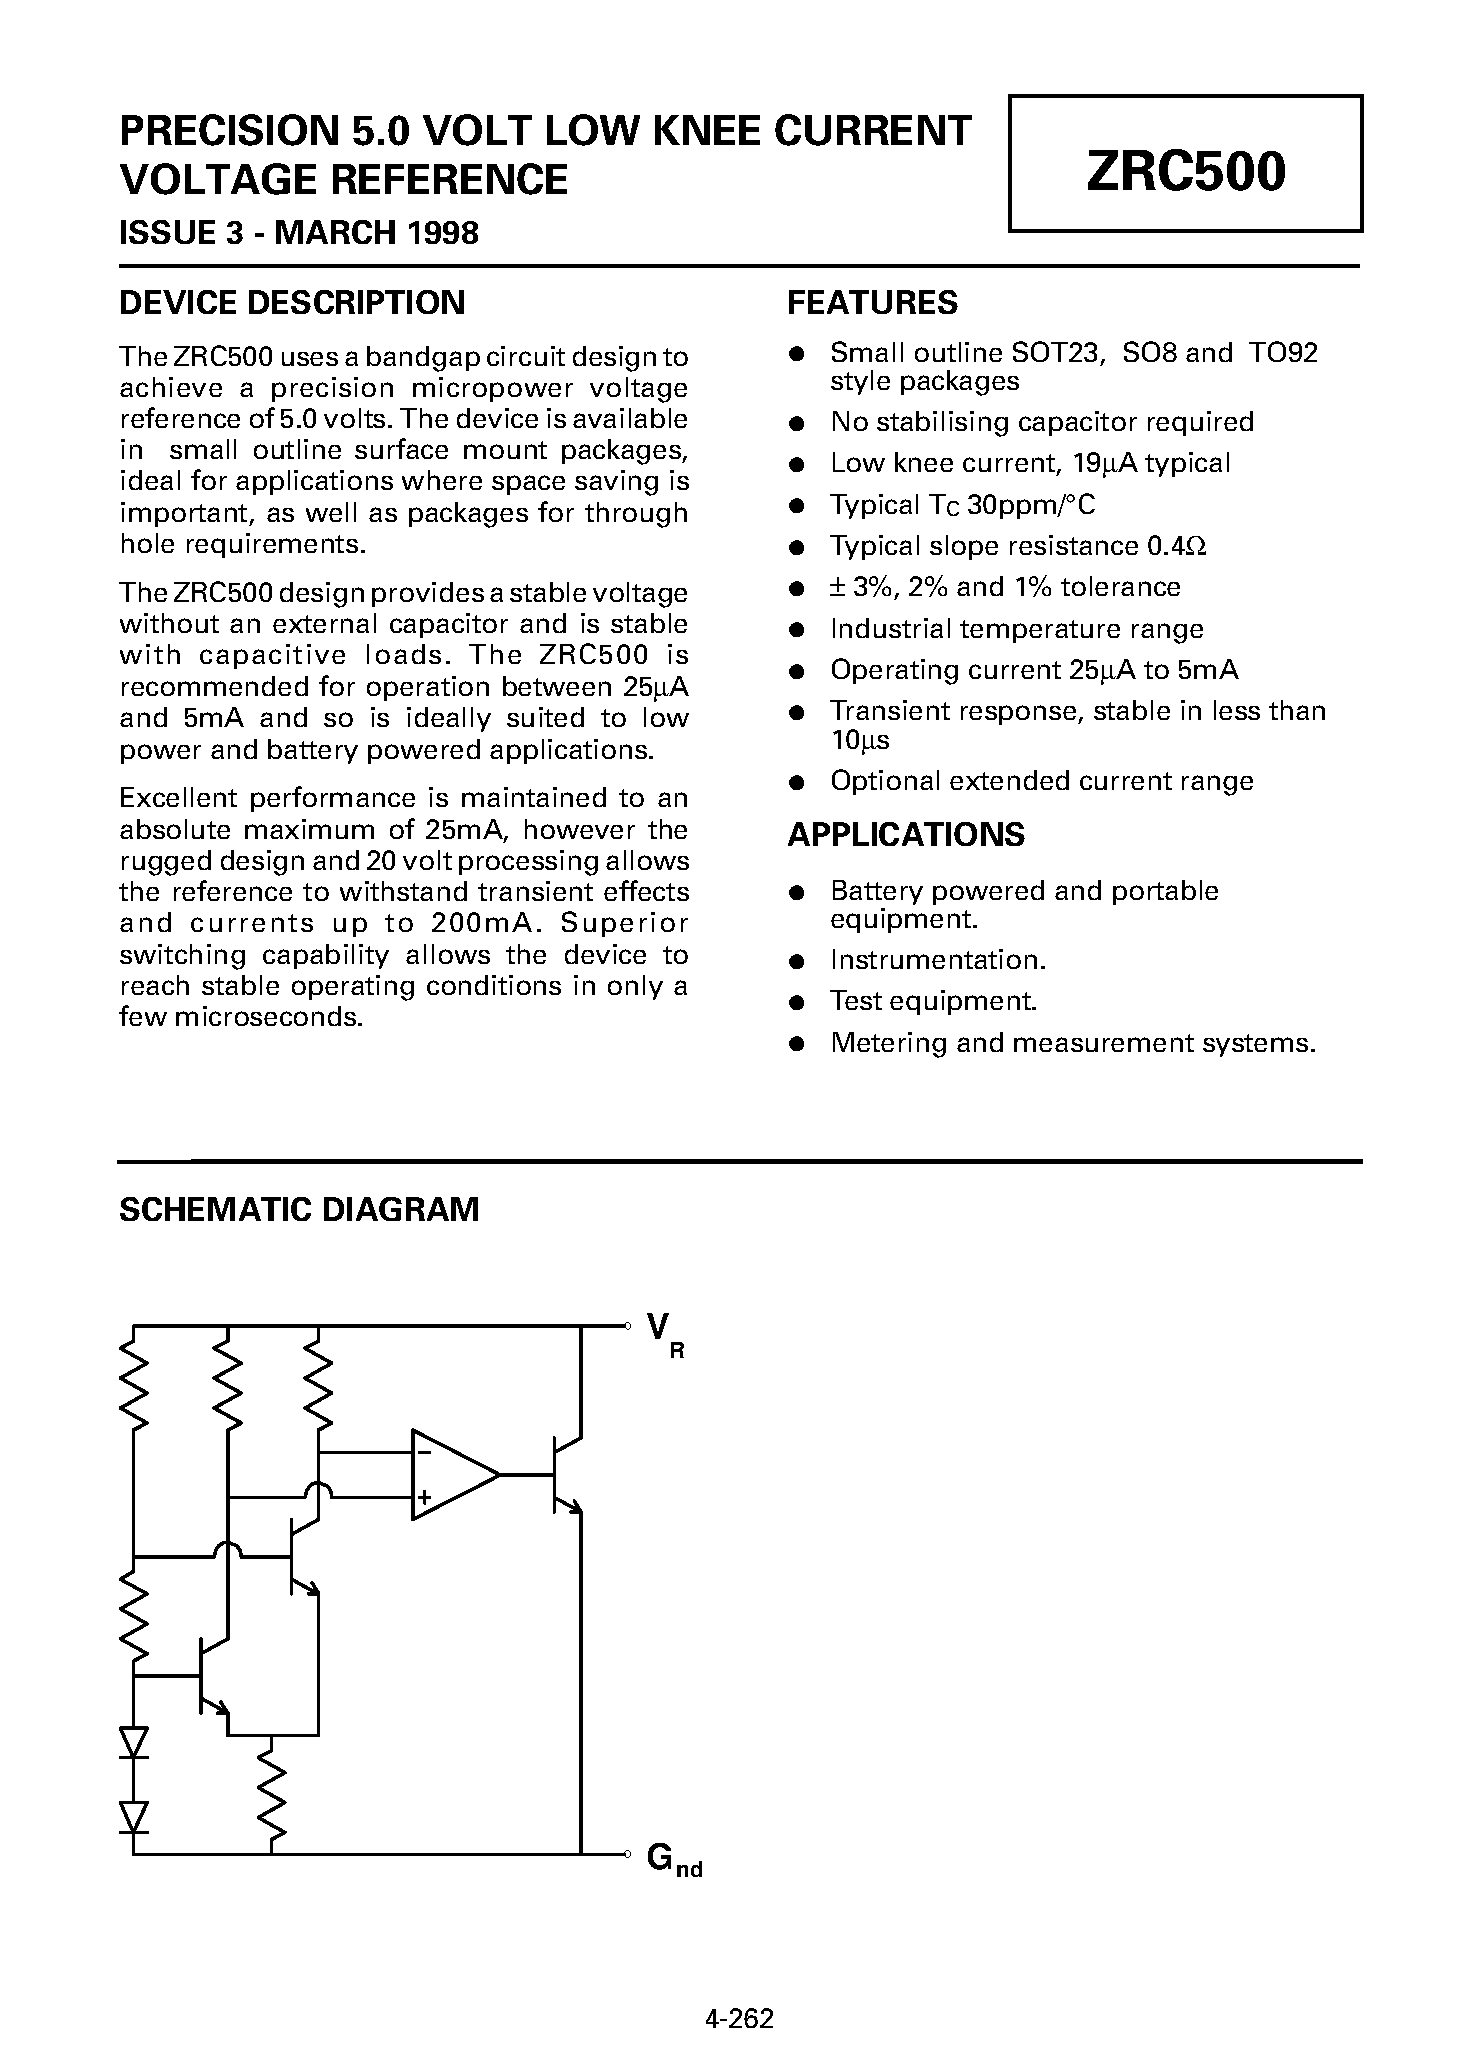 Datasheet ZRC500F03 - PRECISION 5.0 VOLT LOW KNEE CURRENT VOLTAGE REFERENCE page 1